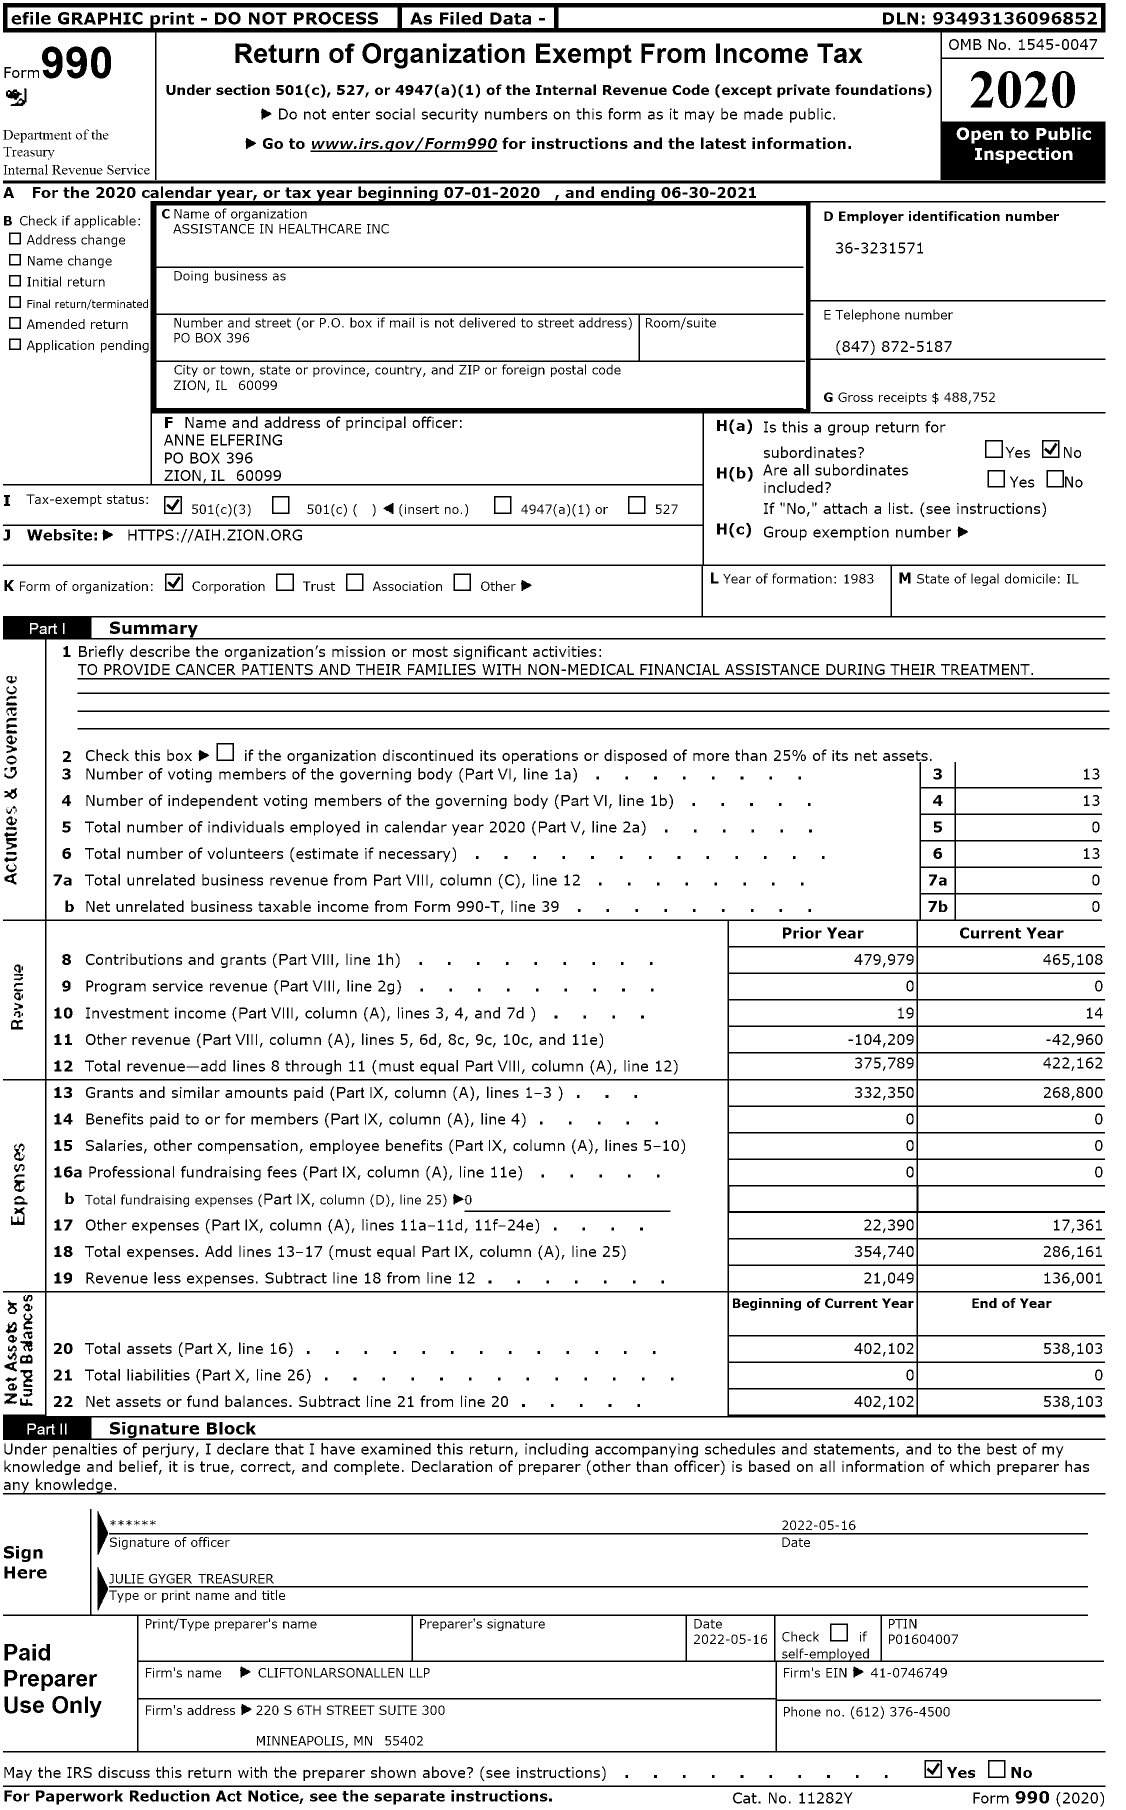 Image of first page of 2020 Form 990 for Assistance in Healthcare